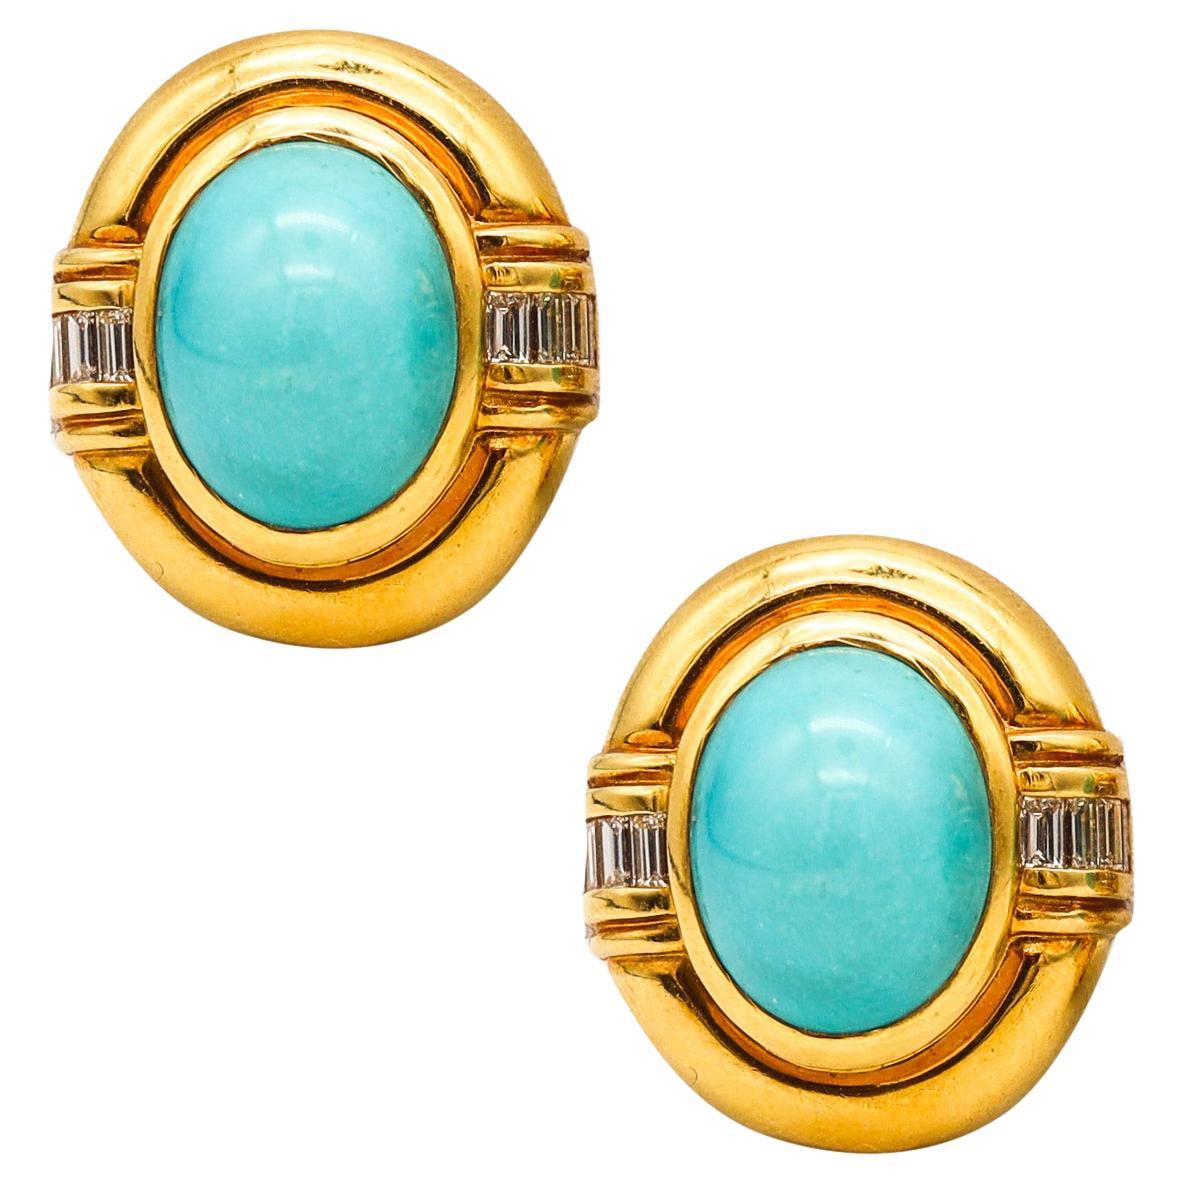 Modernist Clip Earrings 18Kt Yellow Gold With 29.14 Ctw Turquoises & VS Diamonds